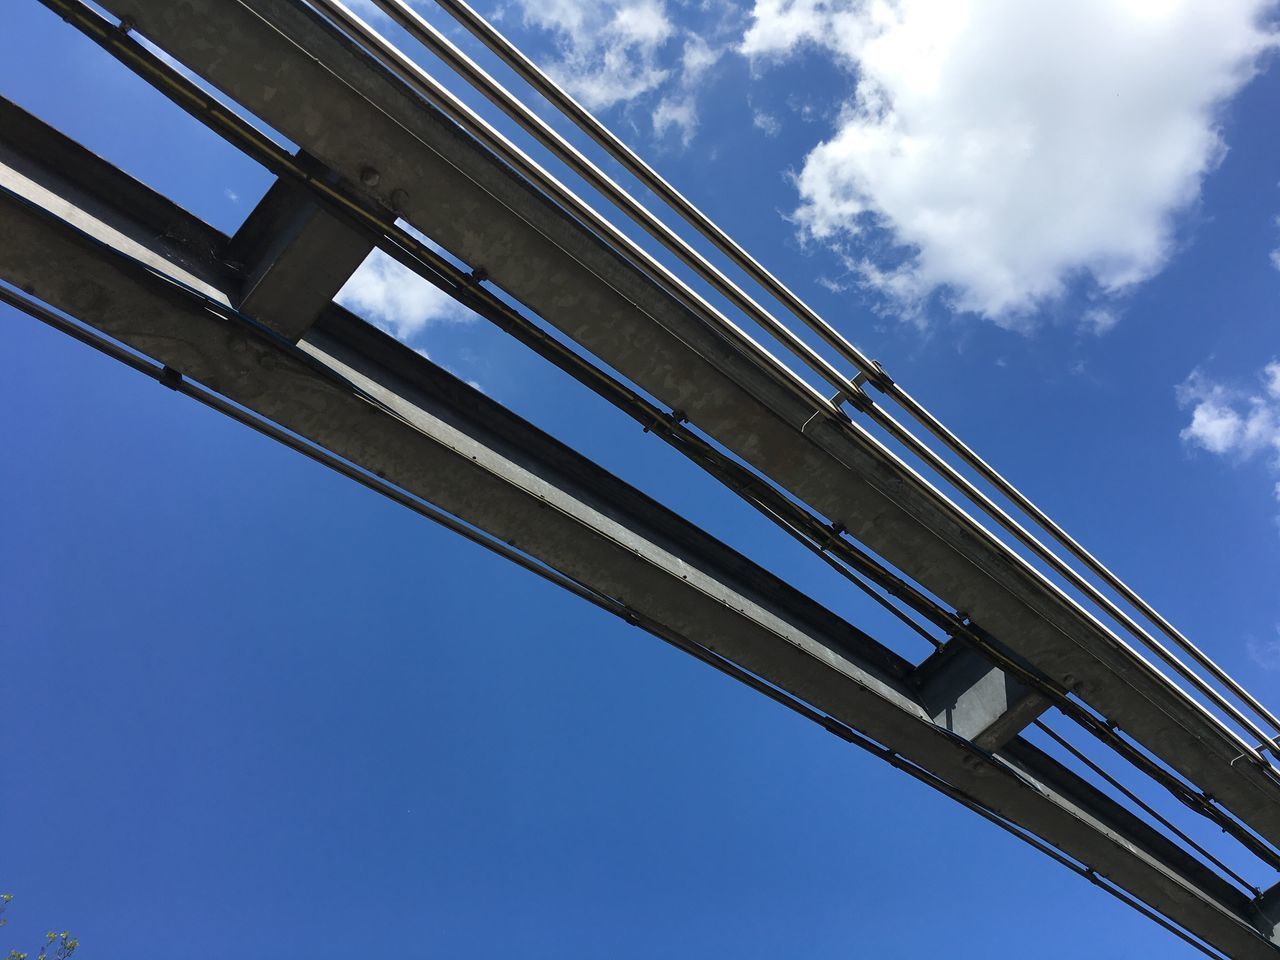 low angle view, sky, built structure, architecture, connection, blue, day, outdoors, bridge - man made structure, cloud - sky, no people, building exterior, girder